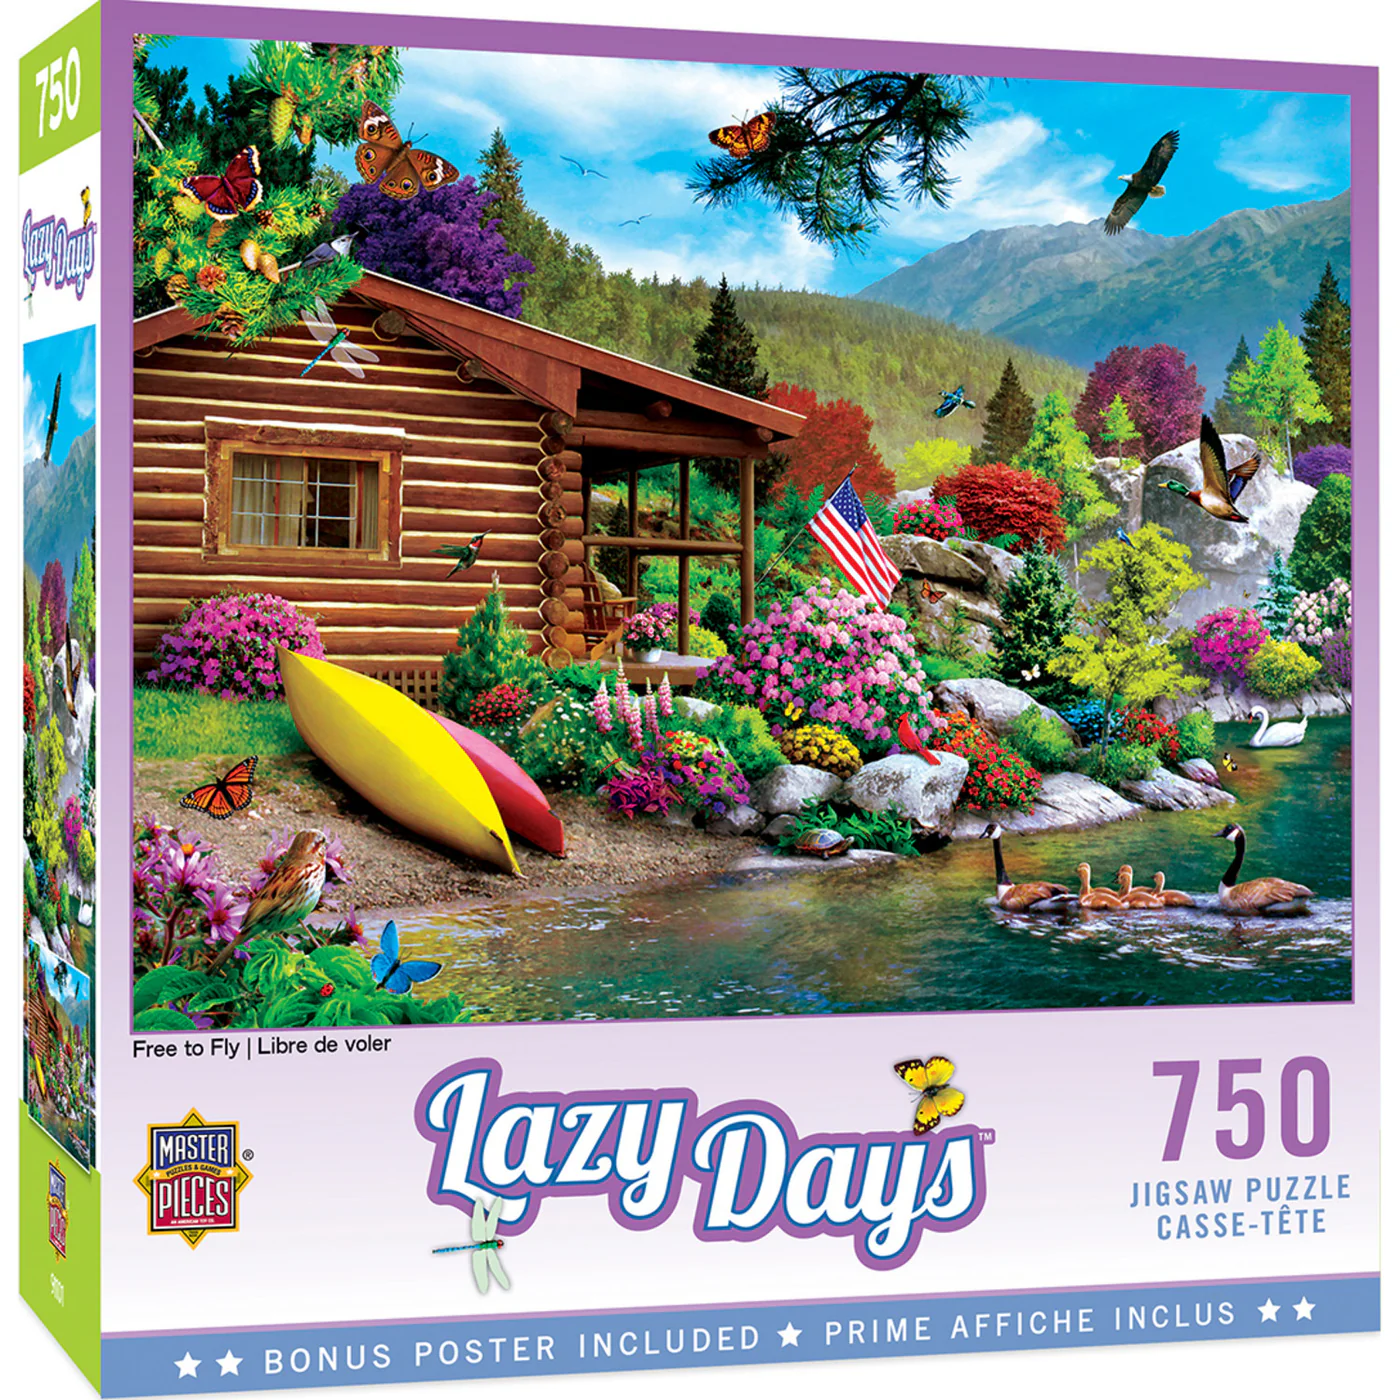 Lazy Days - Free to Fly 750 Piece Jigsaw Puzzle by Masterpieces - $17.99